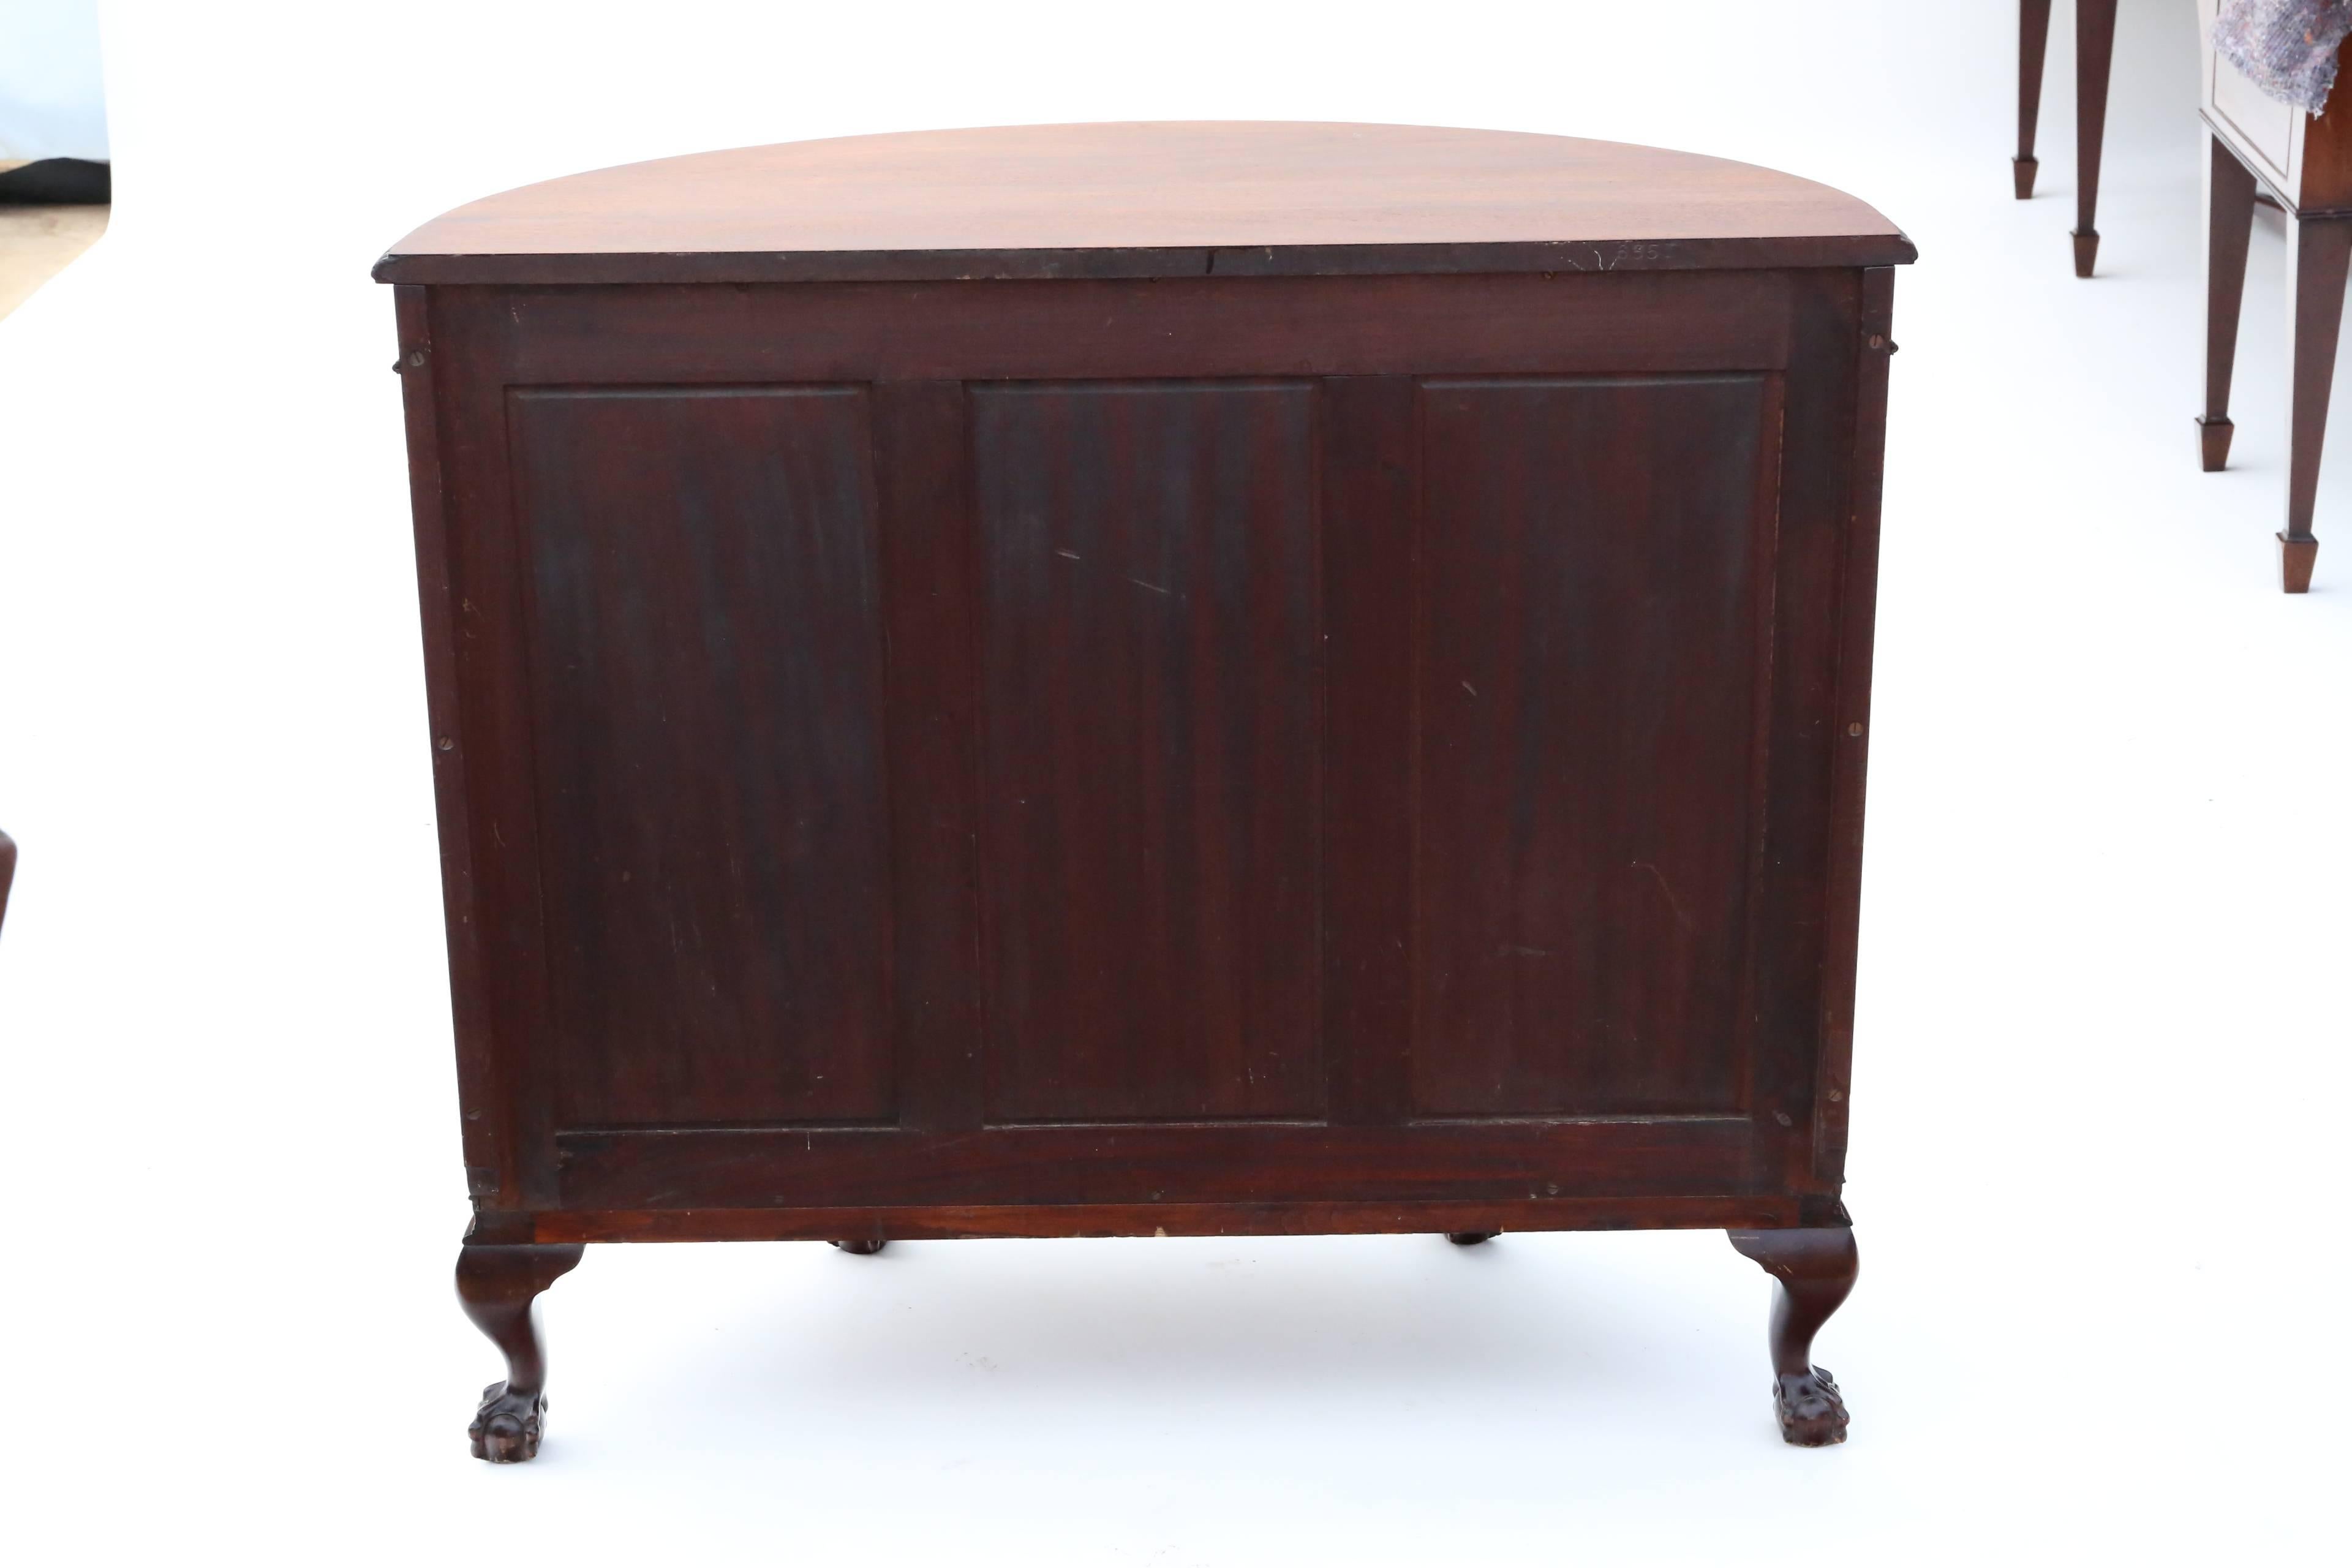 Antique Maple & Co. Mahogany Sideboard Chiffonier Cupboard Console Table For Sale 3